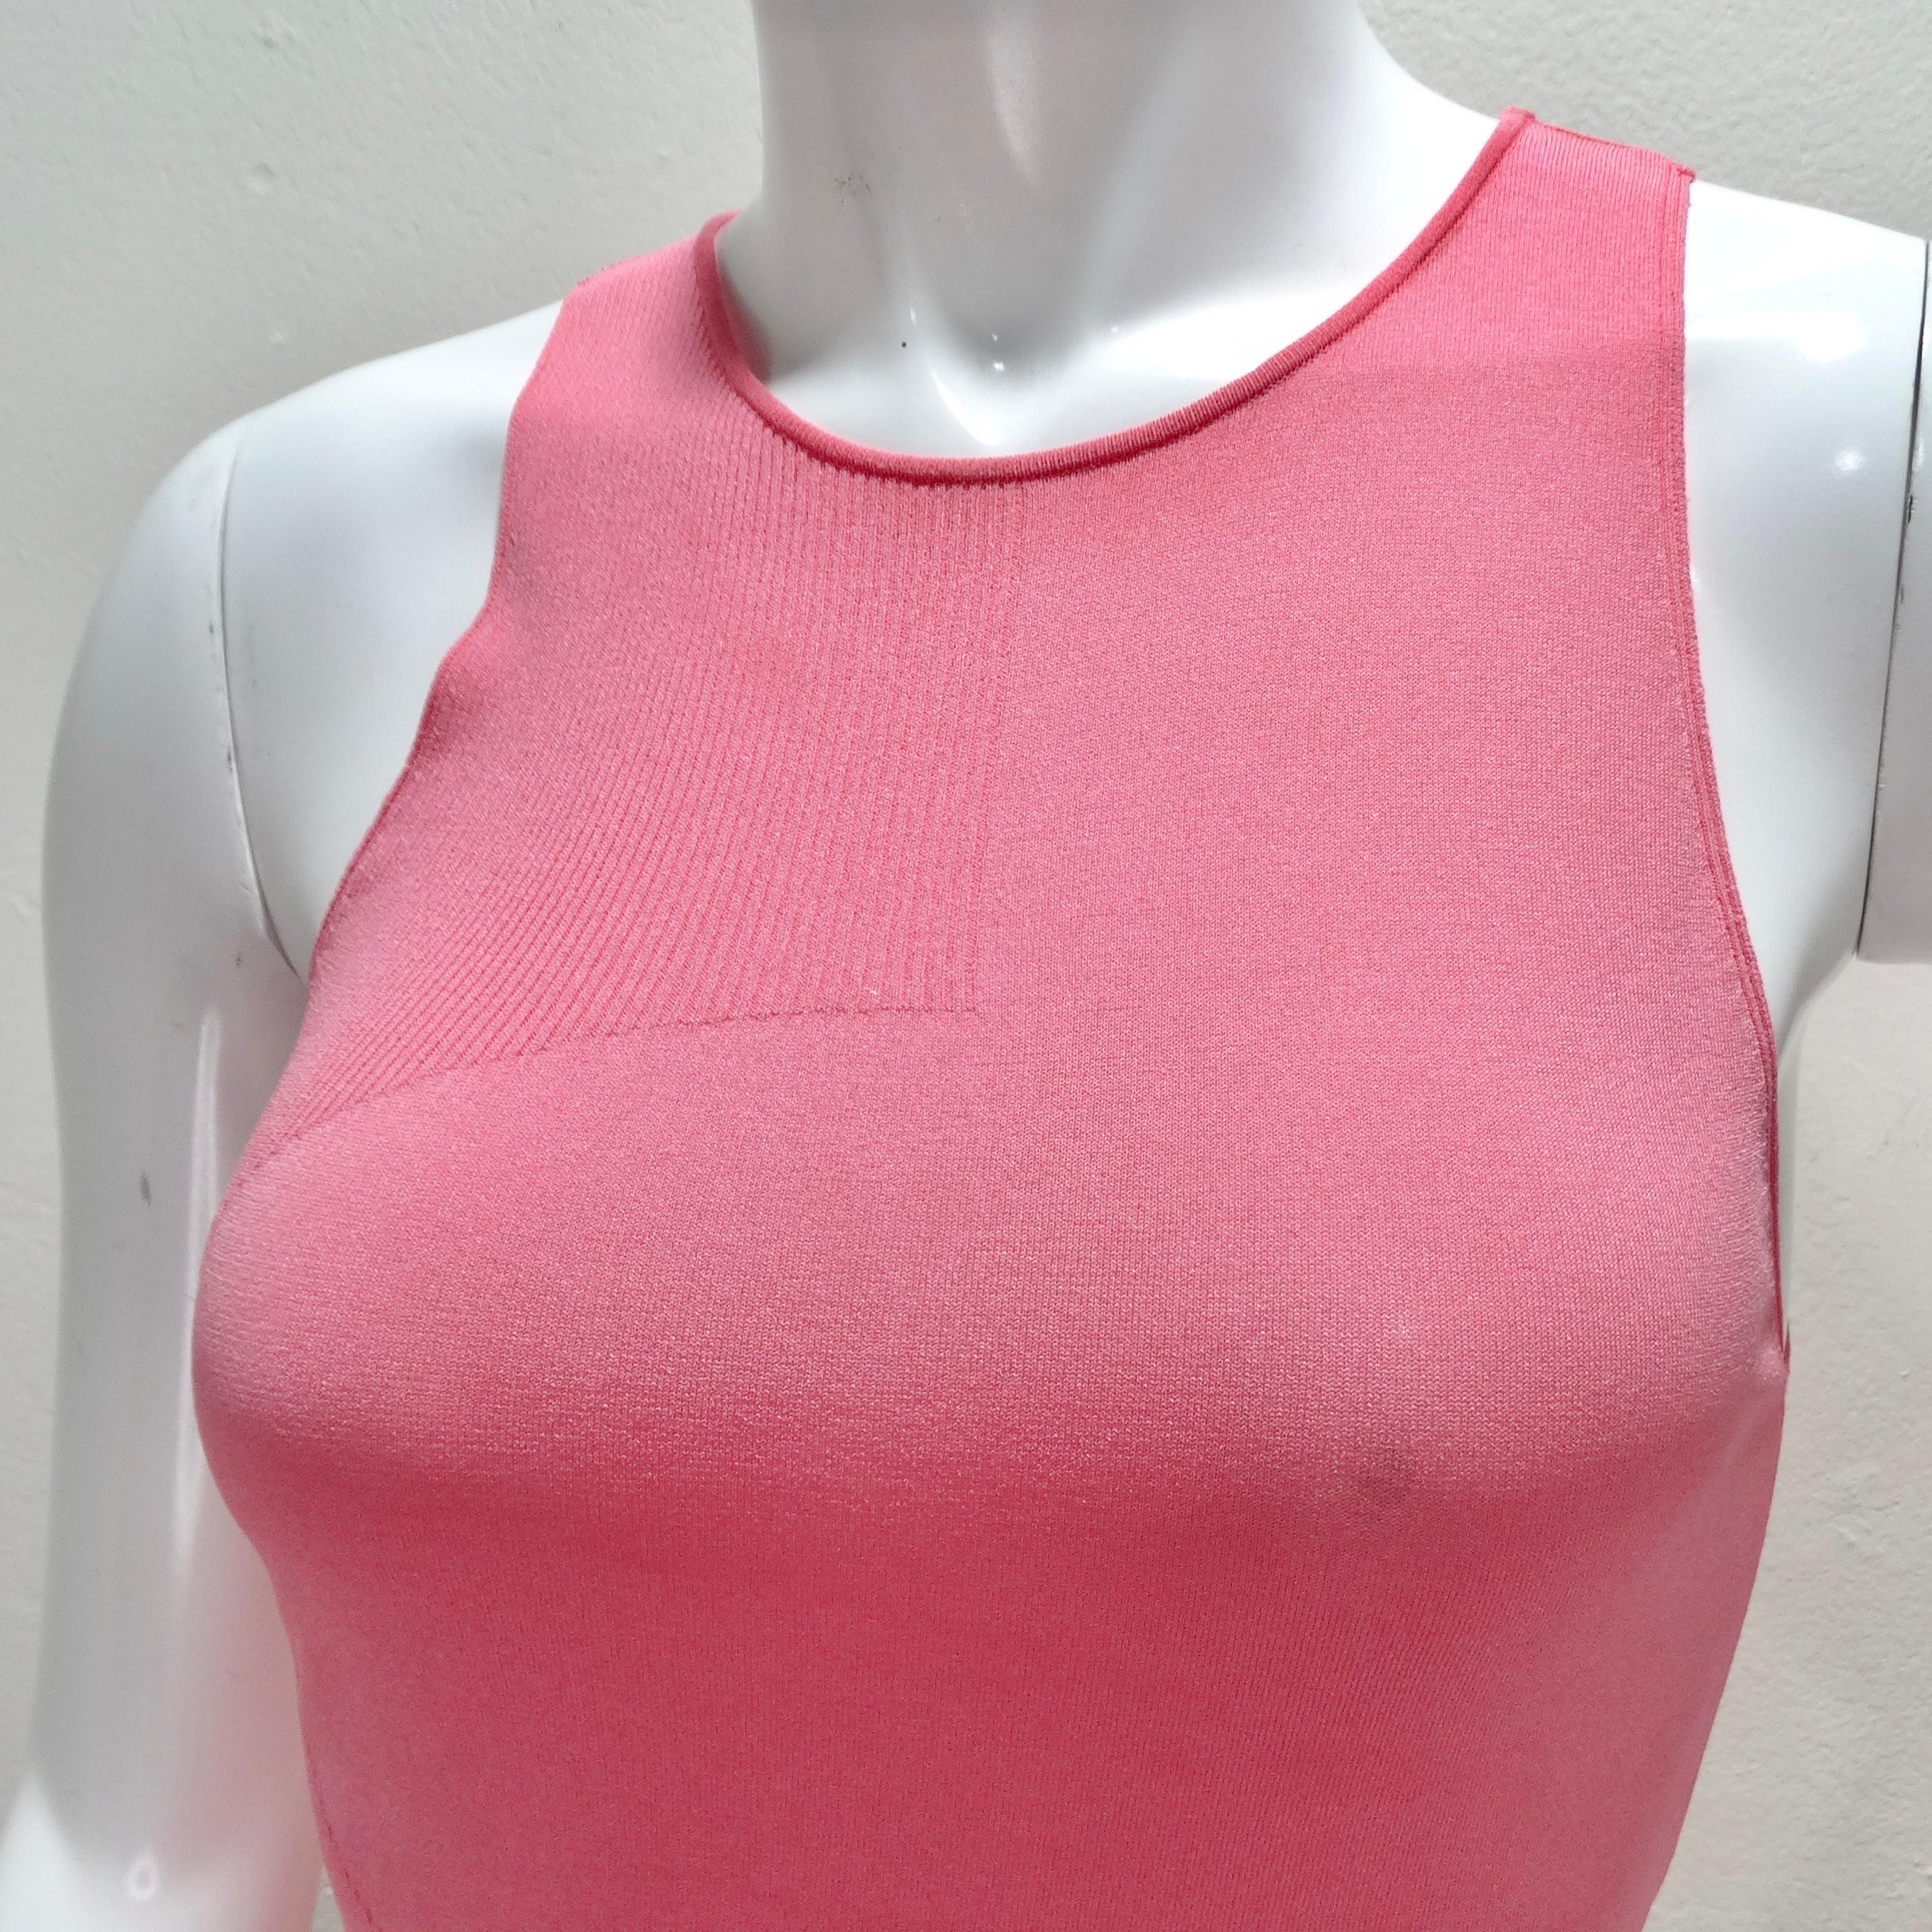 Chanel Pink CC Logo Knit Tank In Good Condition For Sale In Scottsdale, AZ